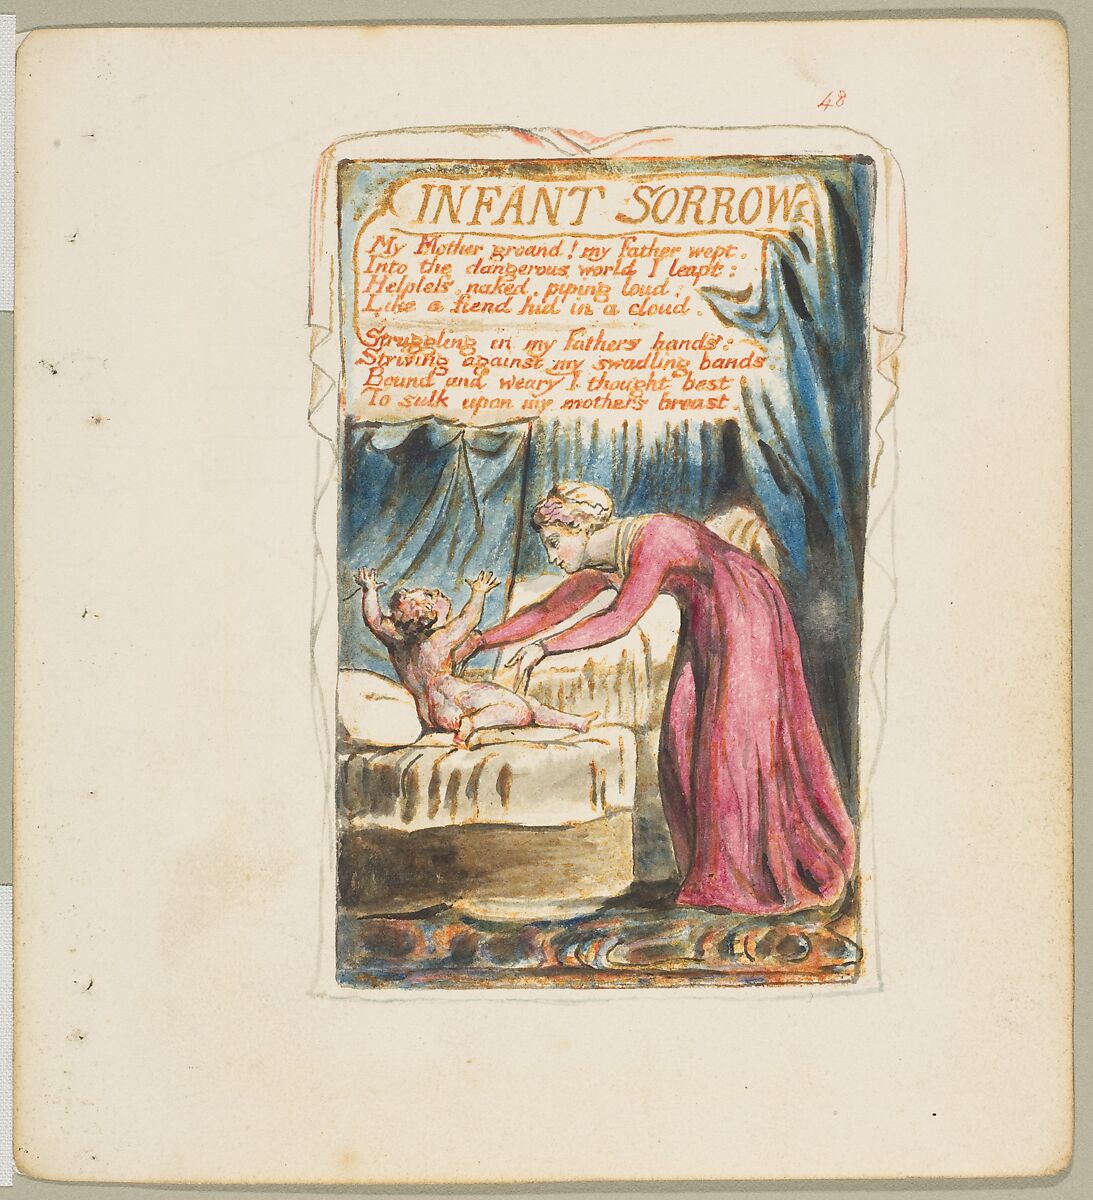 Songs of Experience: Infant Sorrow, William Blake  British, Relief etching printed in orange-brown ink and hand-colored with watercolor and shell gold